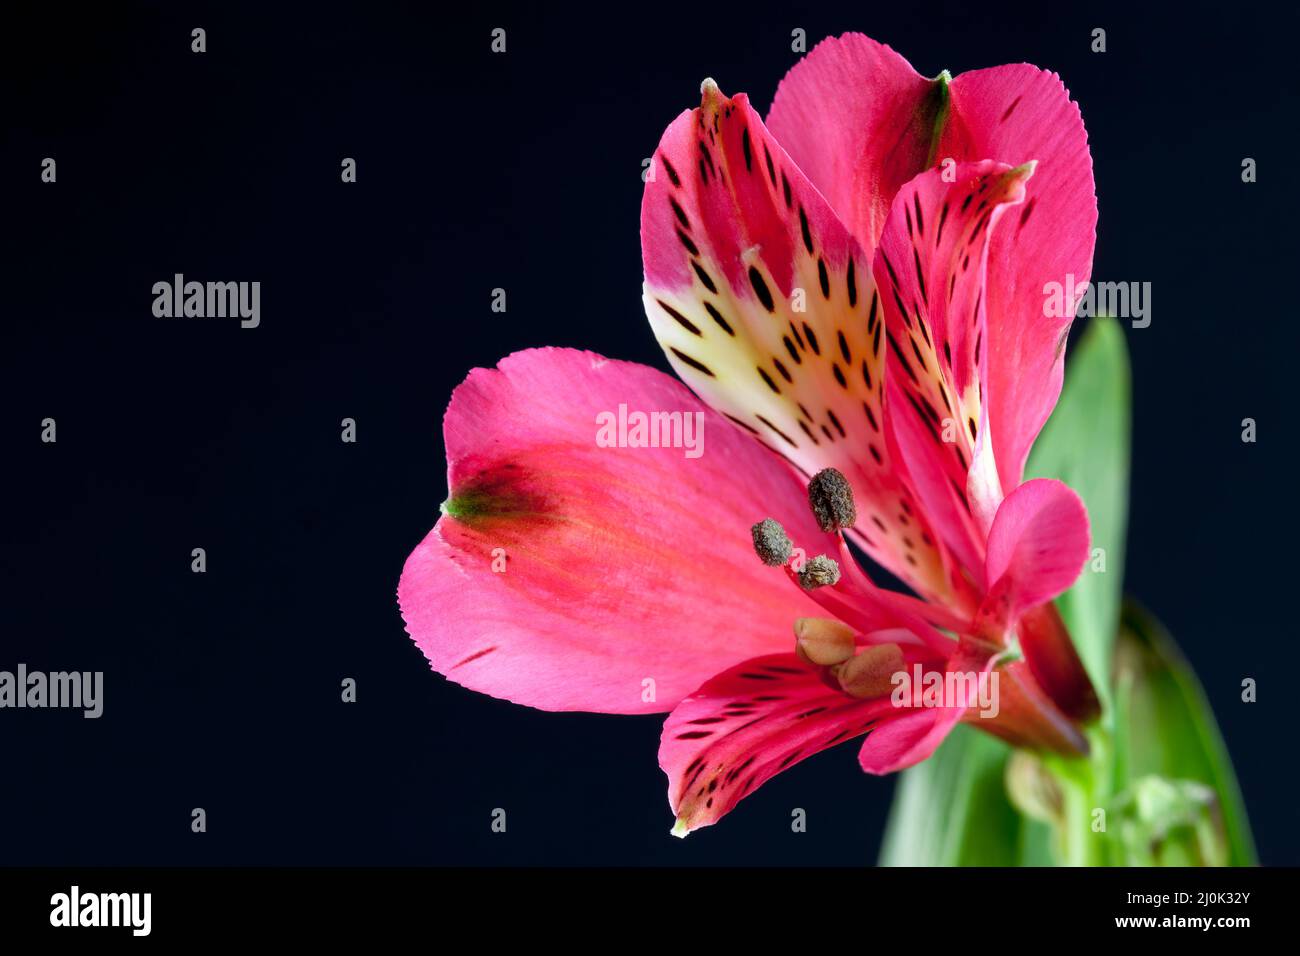 Vibrant red Freesia (Iridaceae) close-up against a dark background Stock Photo